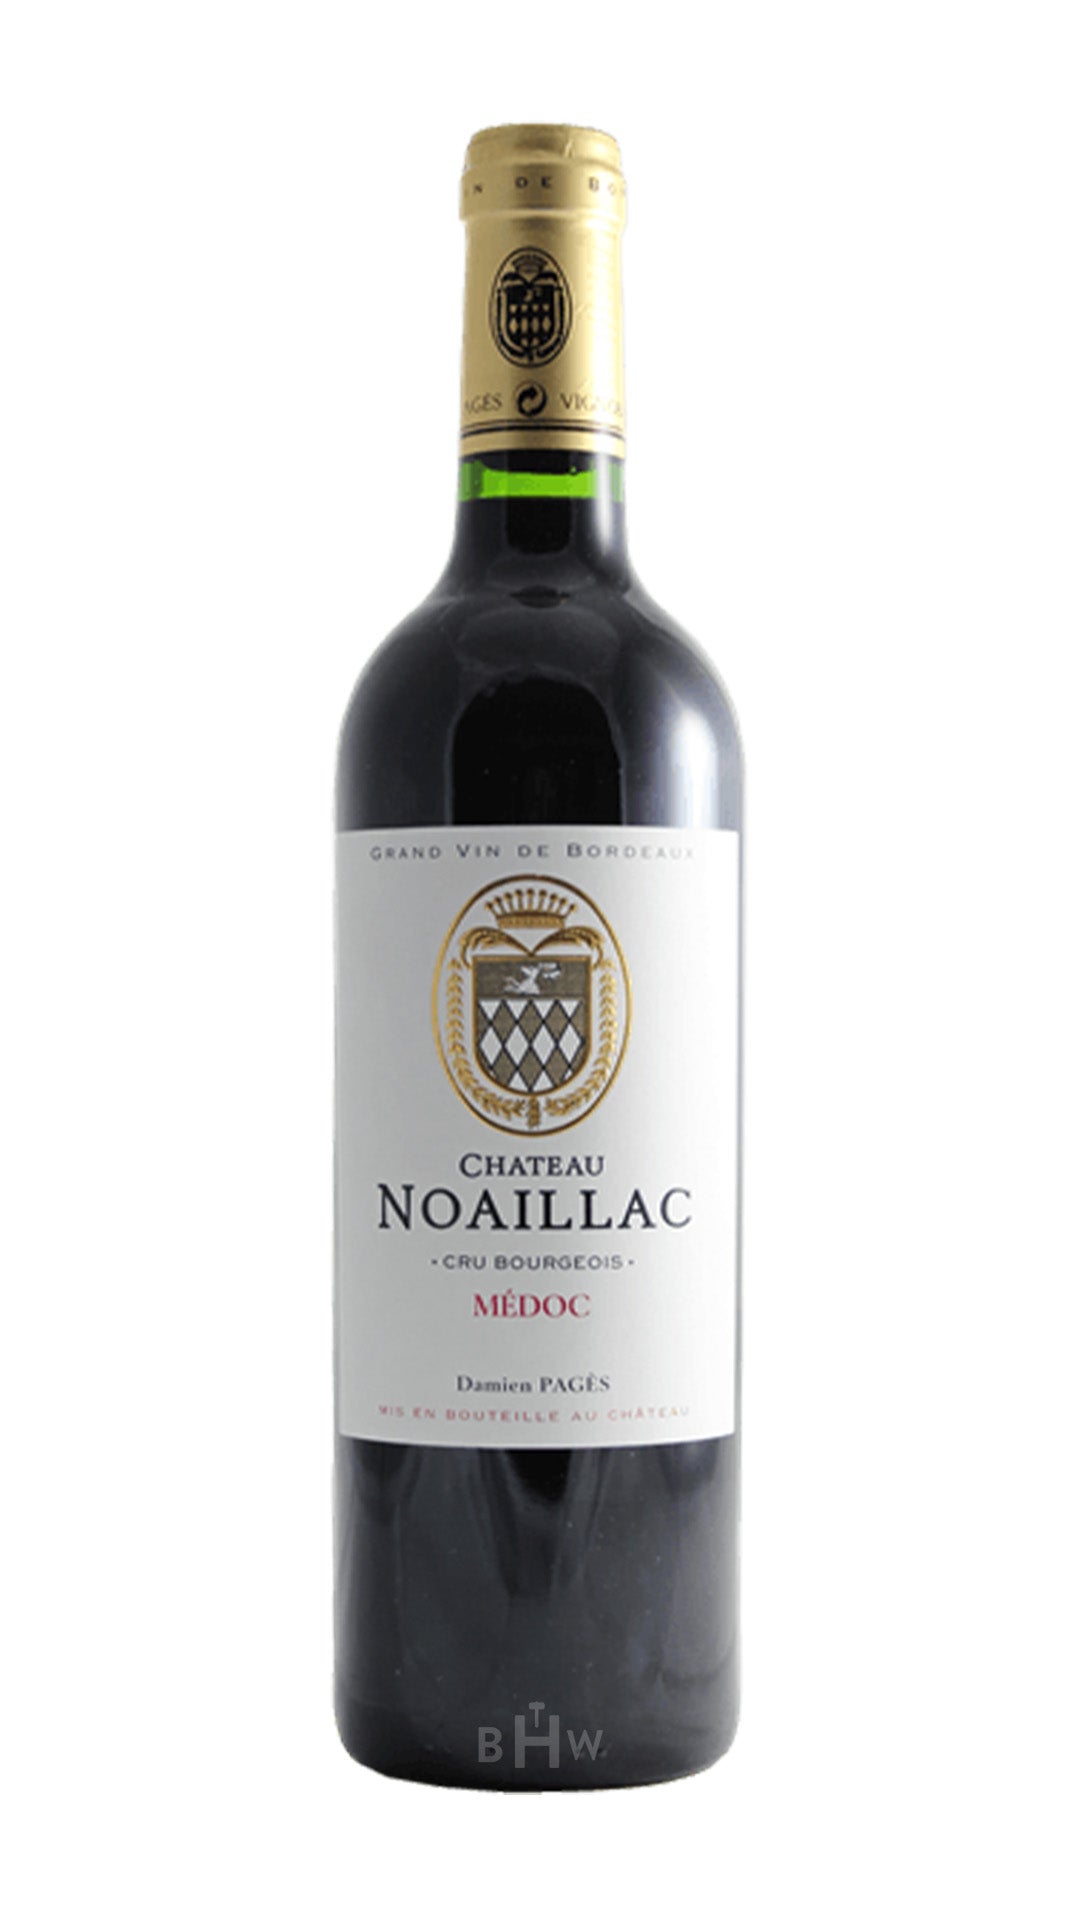 2018 Chateau Noaillac Cru Bourgeois Superieur Medoc